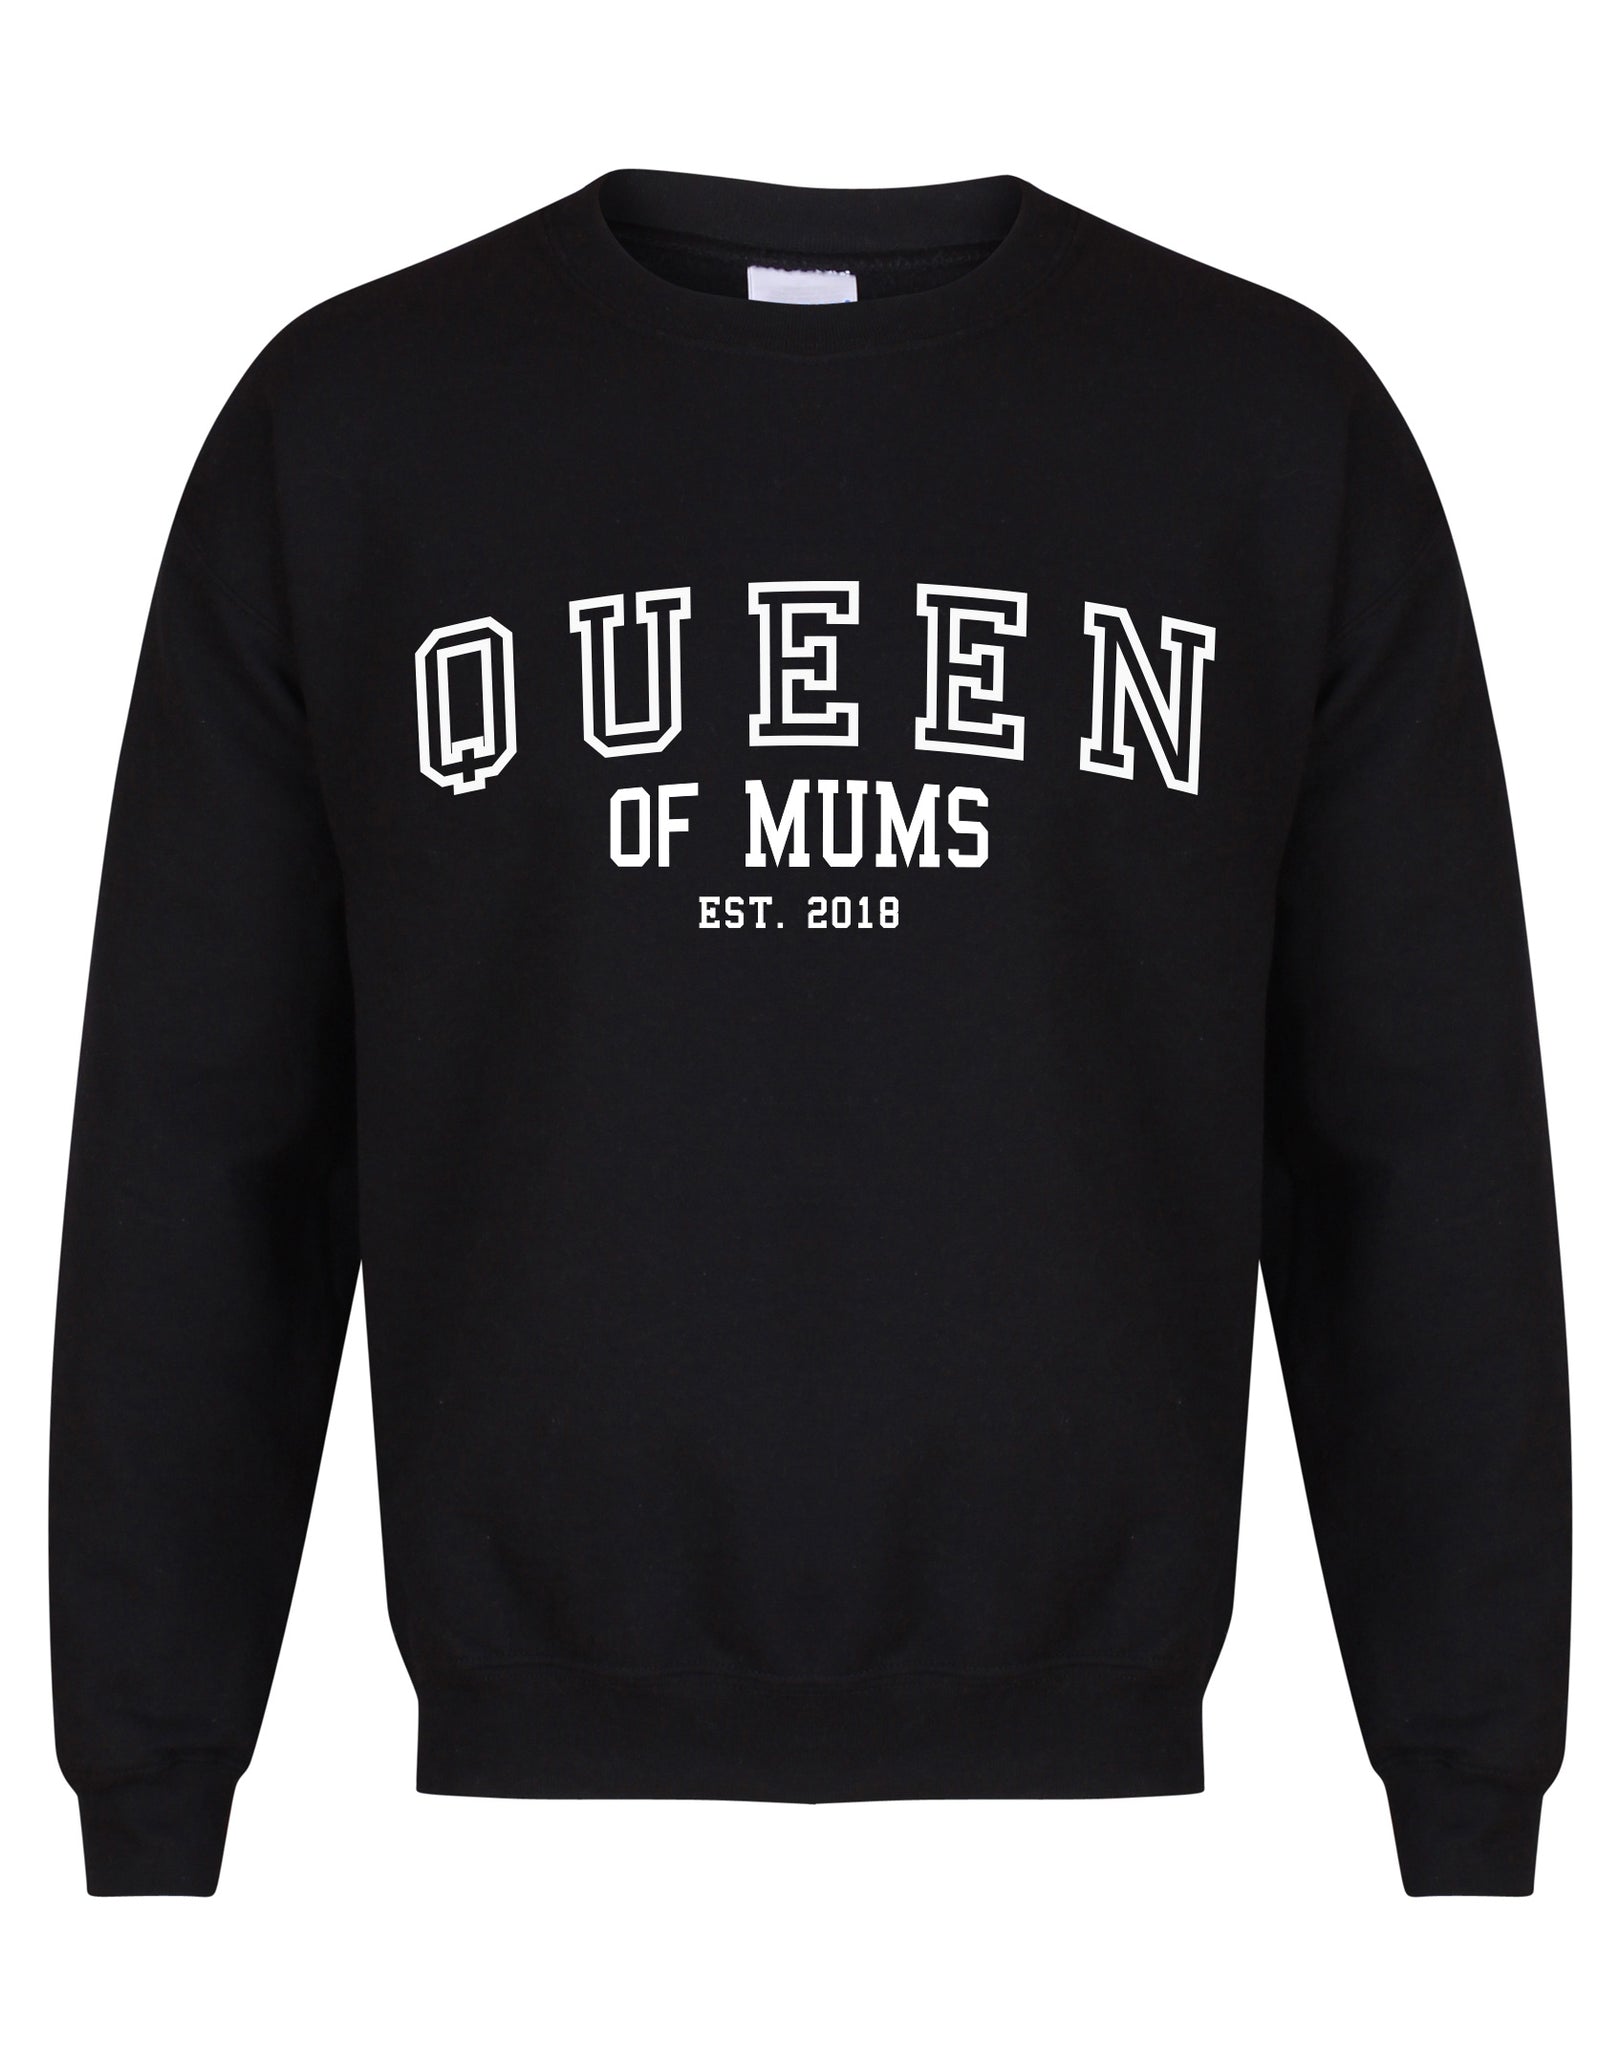 Queen of Mums - Personalised Year - Unisex Fit Sweater